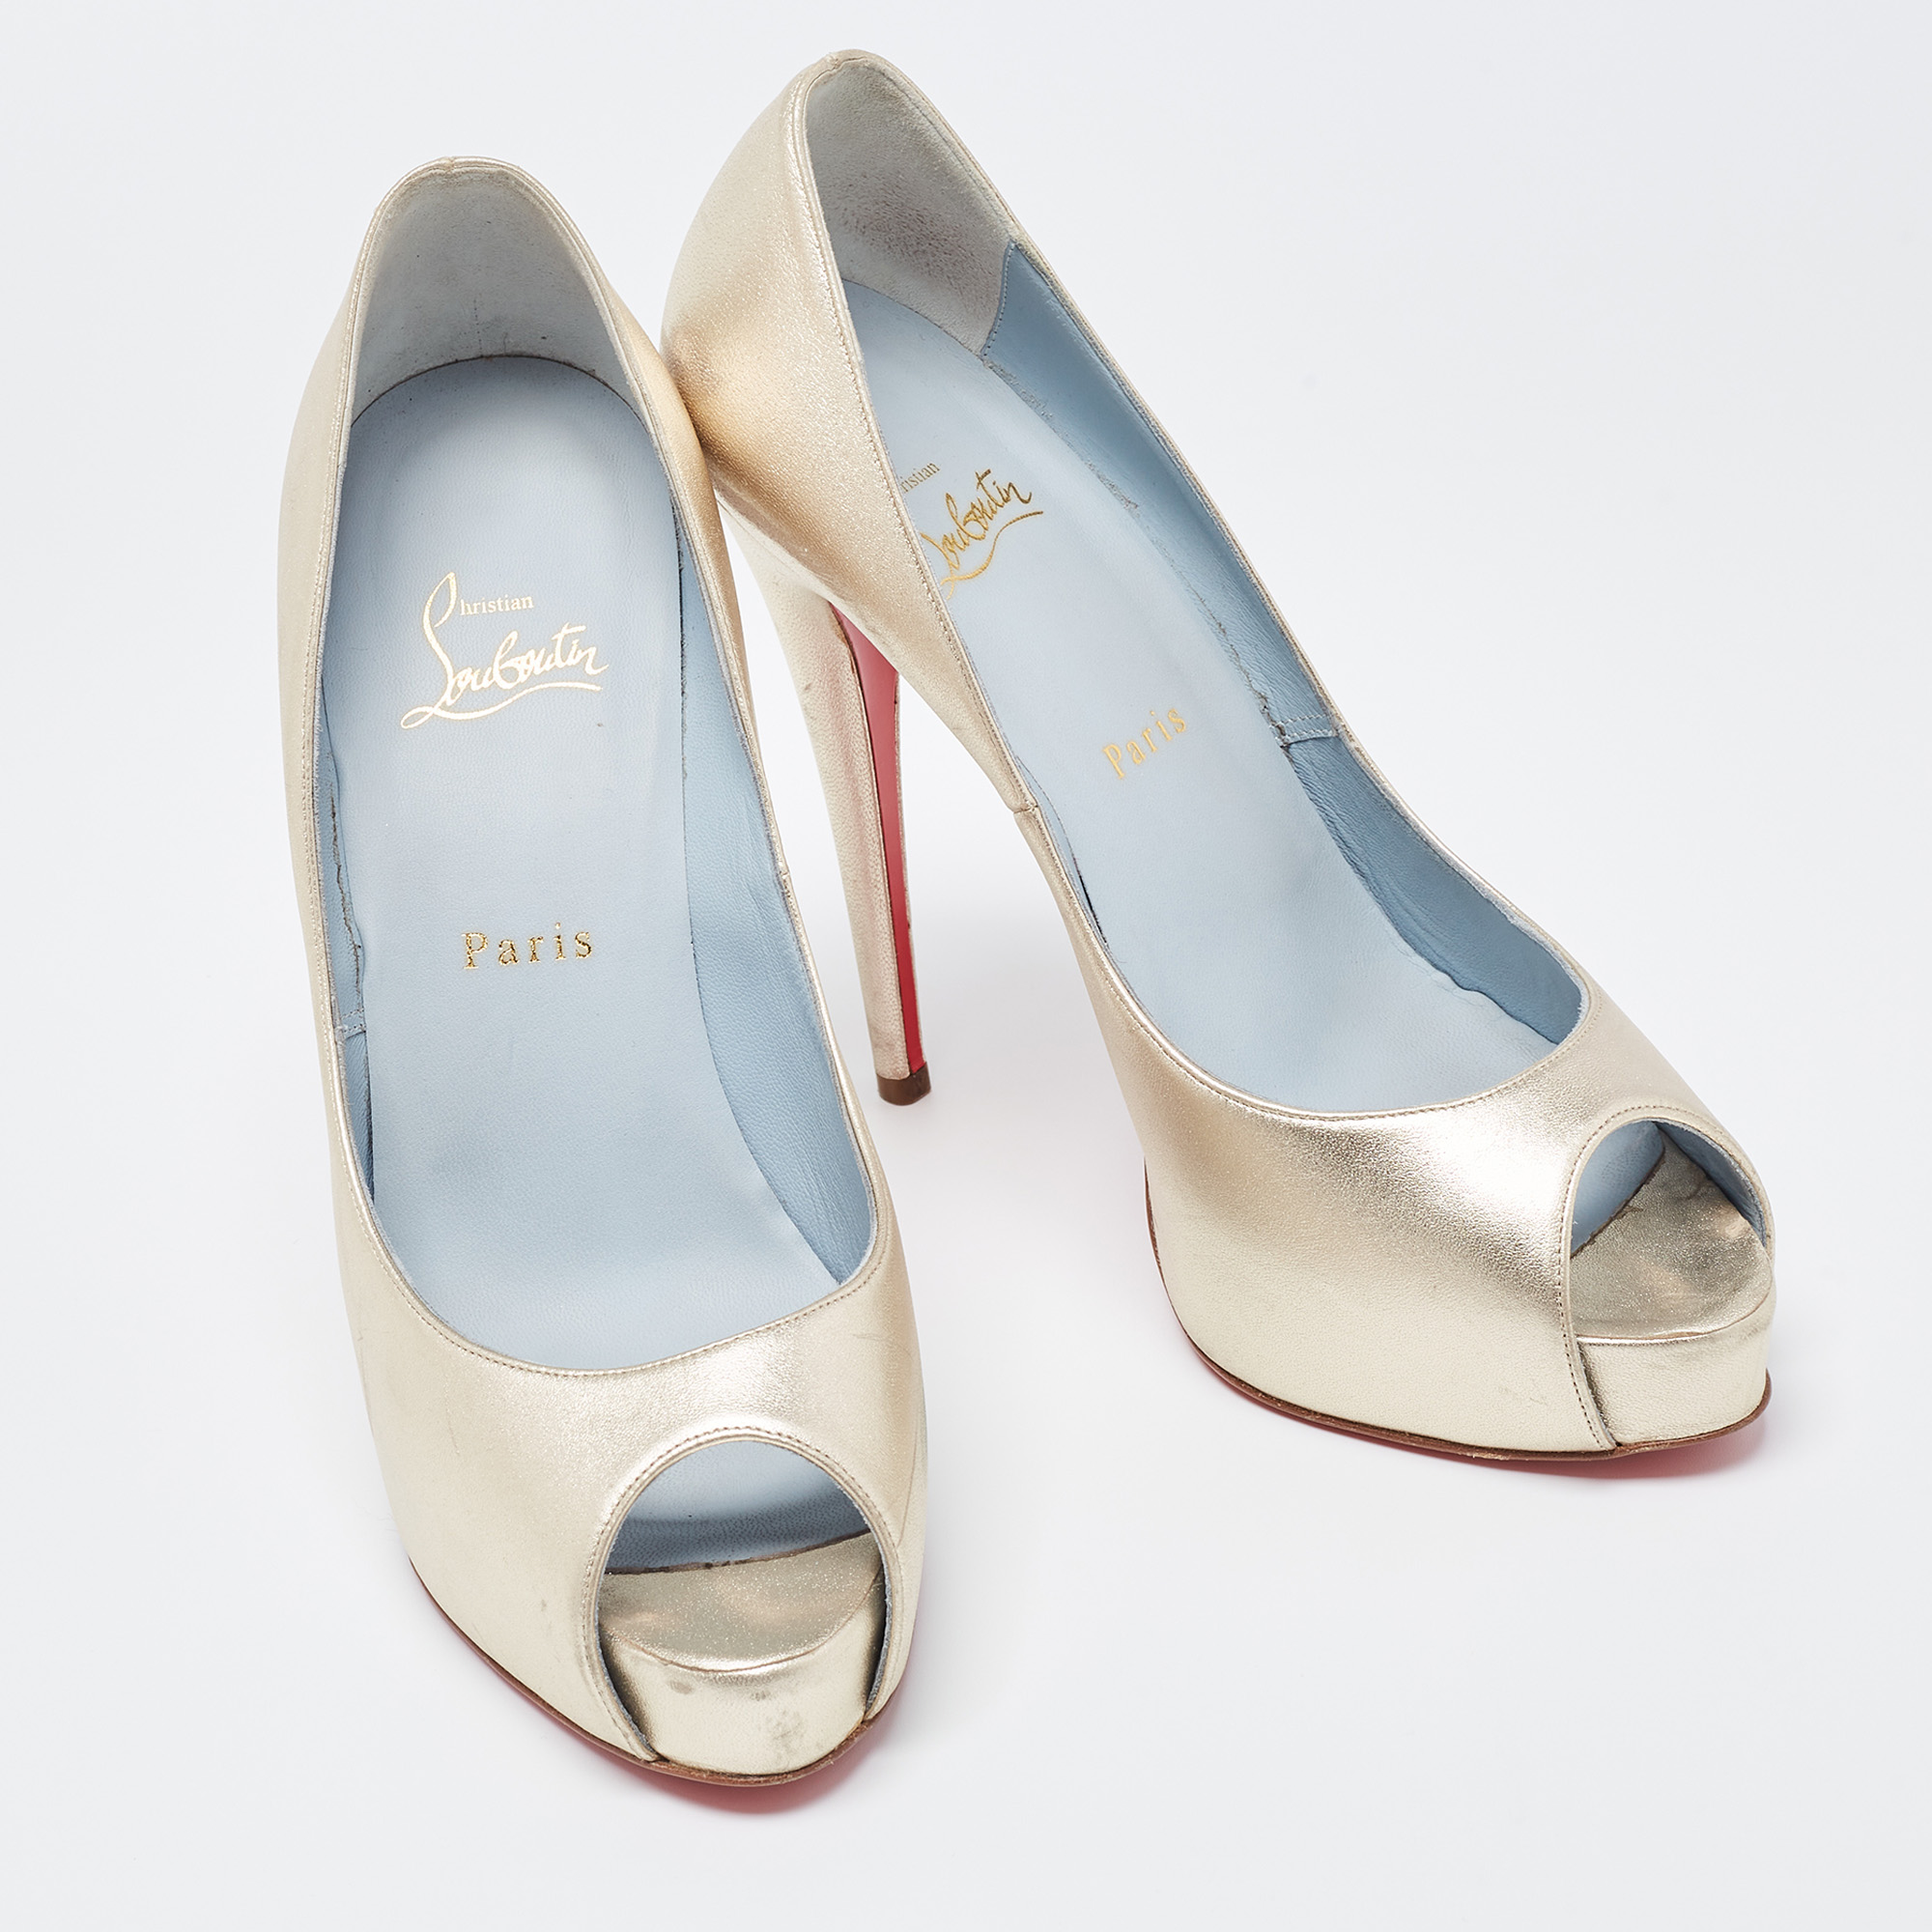 Christian Louboutin Metallic Gold Leather Very Prive Pumps Size 40